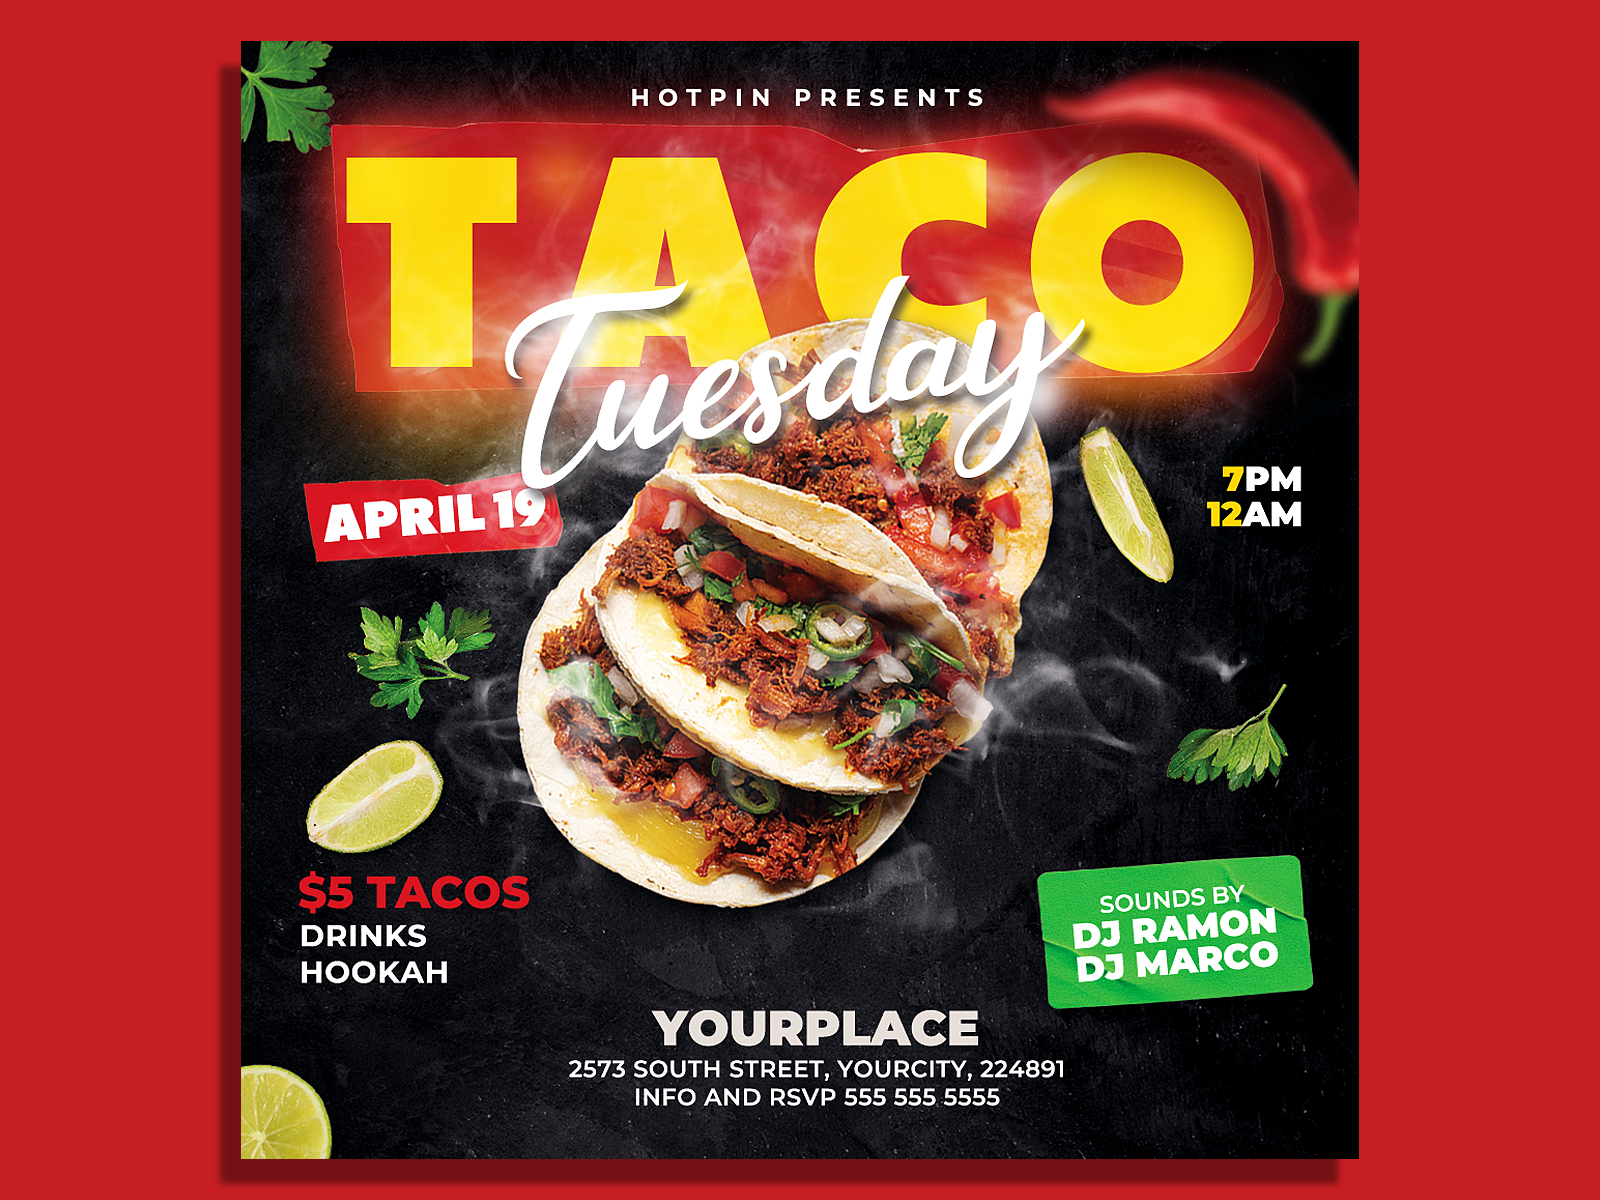 Taco Tuesday Flyer Template by Hotpin on Dribbble